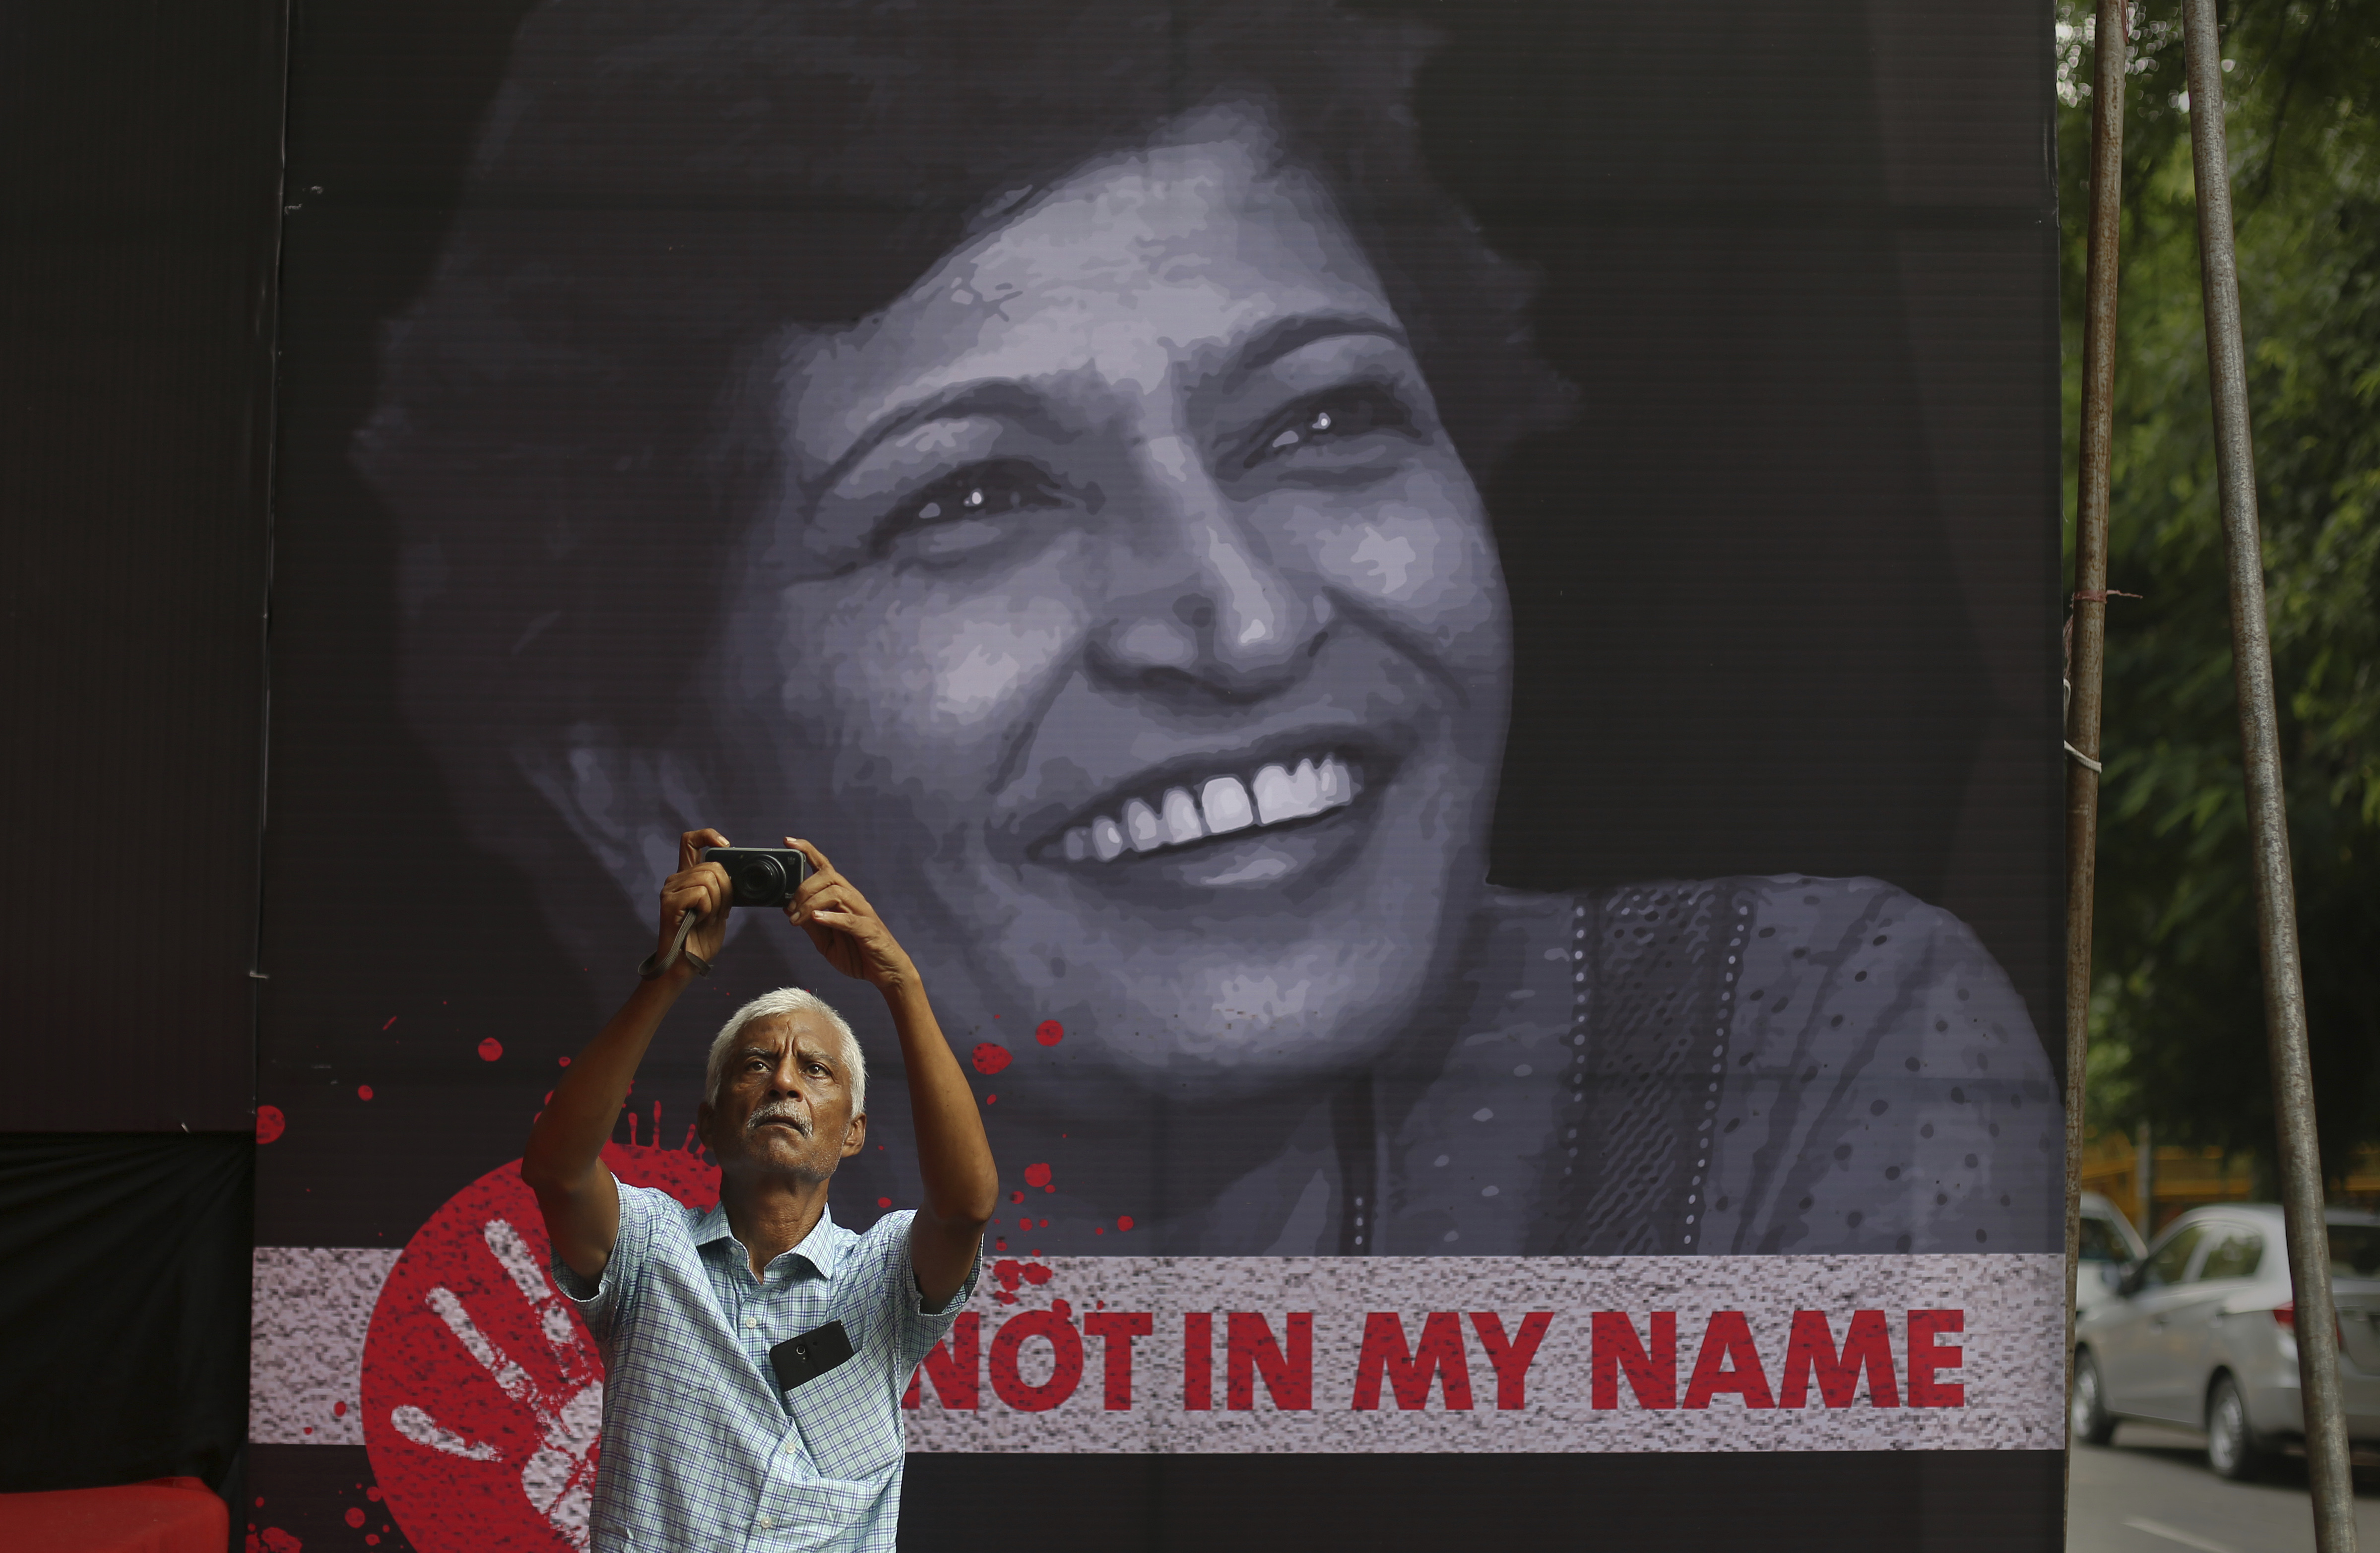 An Indian man takes a photographs during a protest condemning the killing of journalist Gauri Lankesh, protrait in background, in New Delhi, India, Thursday, Sept. 7, 2017. Lankesh's killing has provoked outrage and anguish across the country, with thousands protesting what they see as an effort to silence critics of India's ruling Hindu nationalist party. (AP Photo/Altaf Qadri)